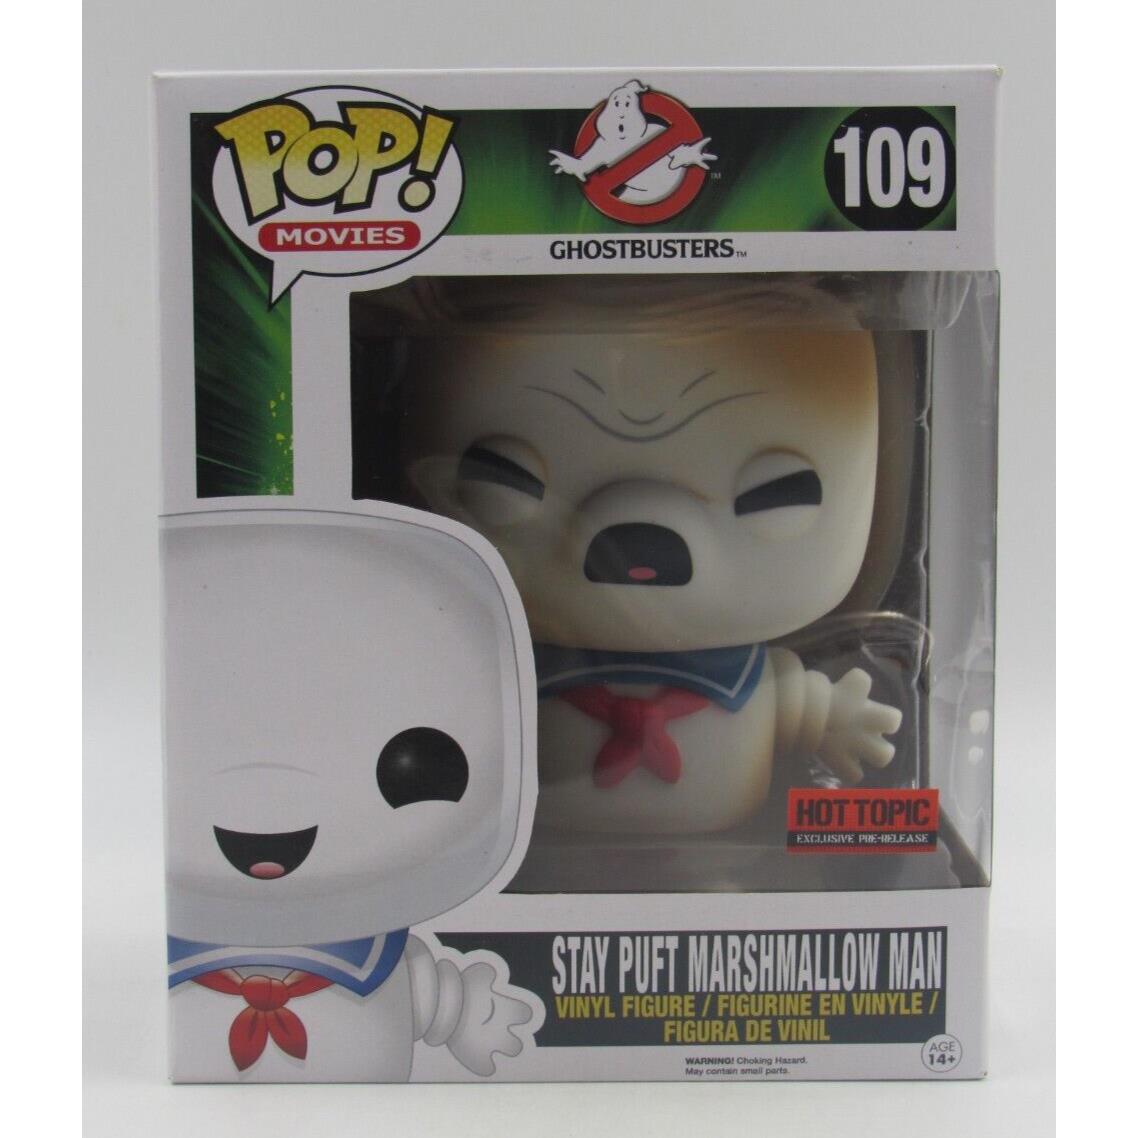 Funko Pop Ghostbusters Stay Puft Marshmallow Man 109 Hot Topic Pre-release